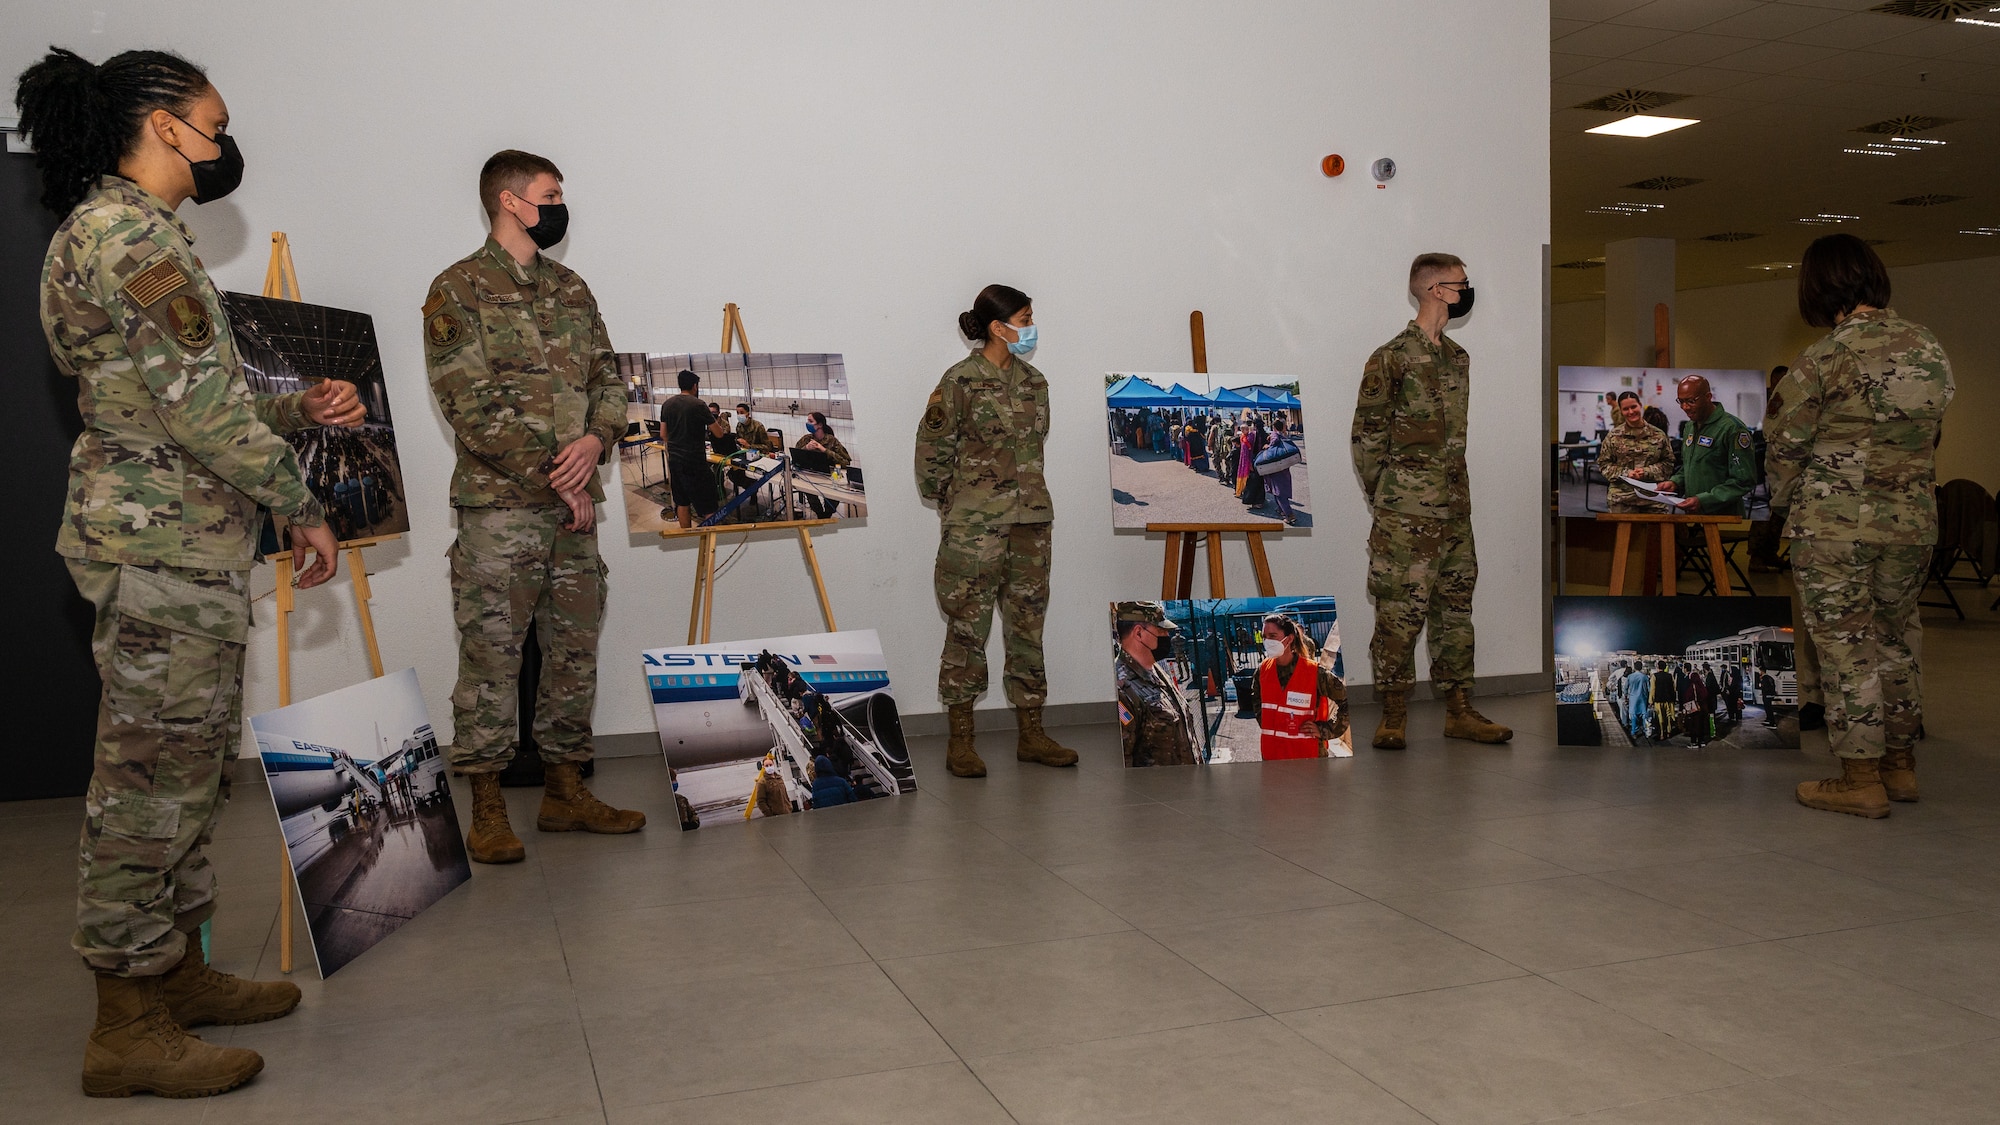 A group of military members standing around photo displays.